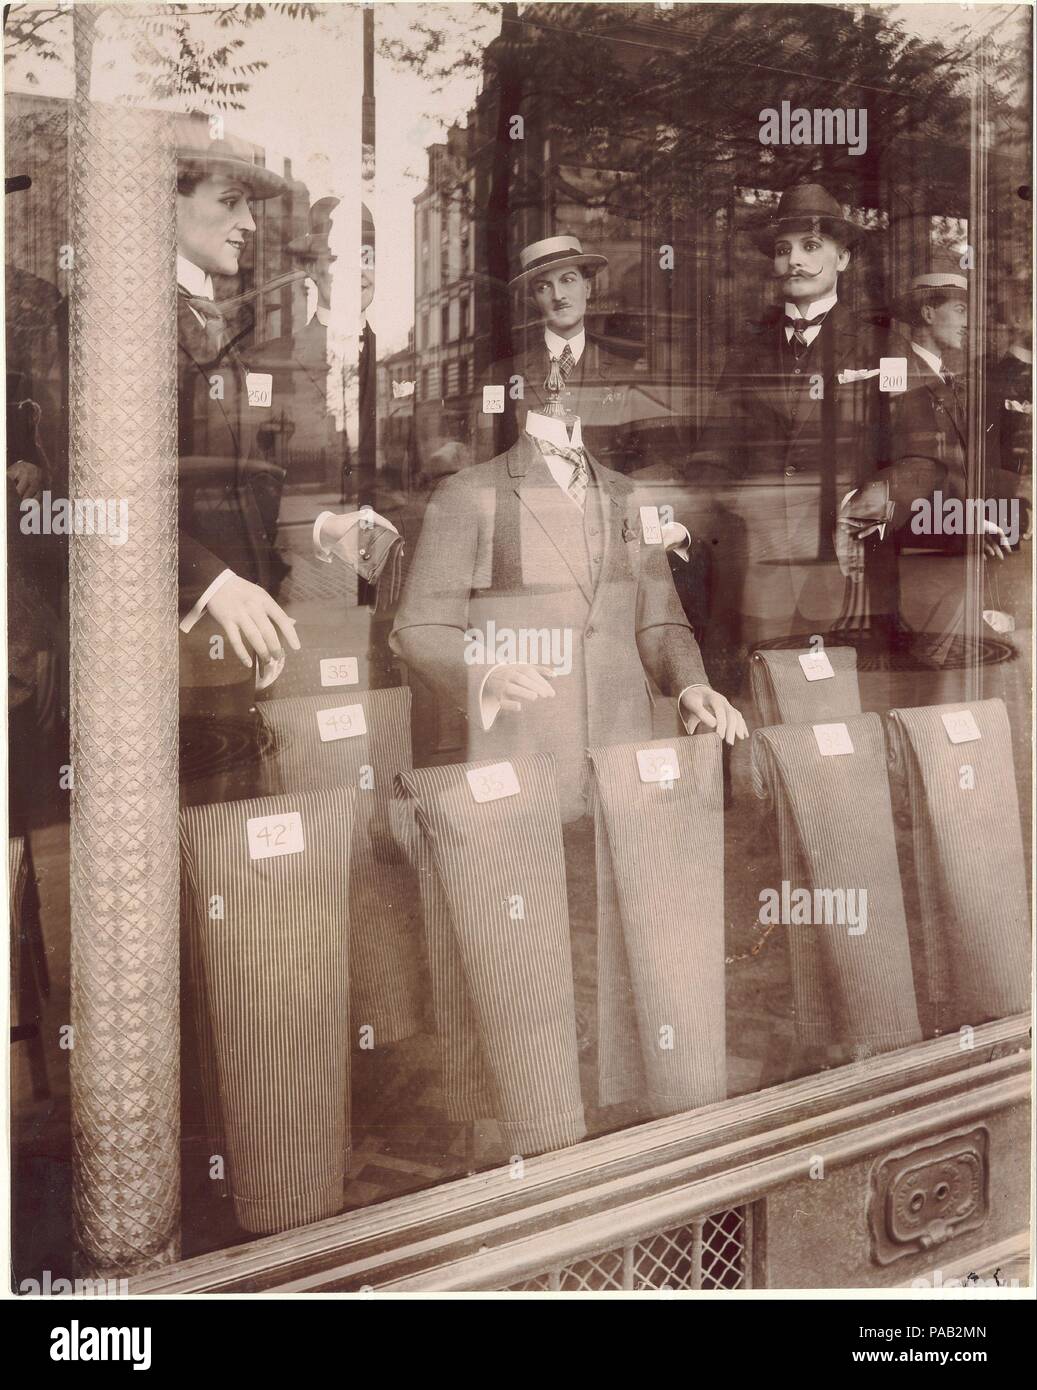 Avenue des Gobelins. Artist: Eugène Atget (French, Libourne 1857-1927 Paris). Dimensions: 21.9 x 17.3 cm (8 5/8 x 6 13/16 in.). Date: 1925.  Atget's many photographs of mannequins in shop windows appealed greatly to the Parisian avant-garde, who found in the aging artist an unwitting but kindred spirit. In these pictures, the Surrealists focused on the lamination of what was inside and outside and on the lovely dissolve between fact and imagination. Museum: Metropolitan Museum of Art, New York, USA. Stock Photo